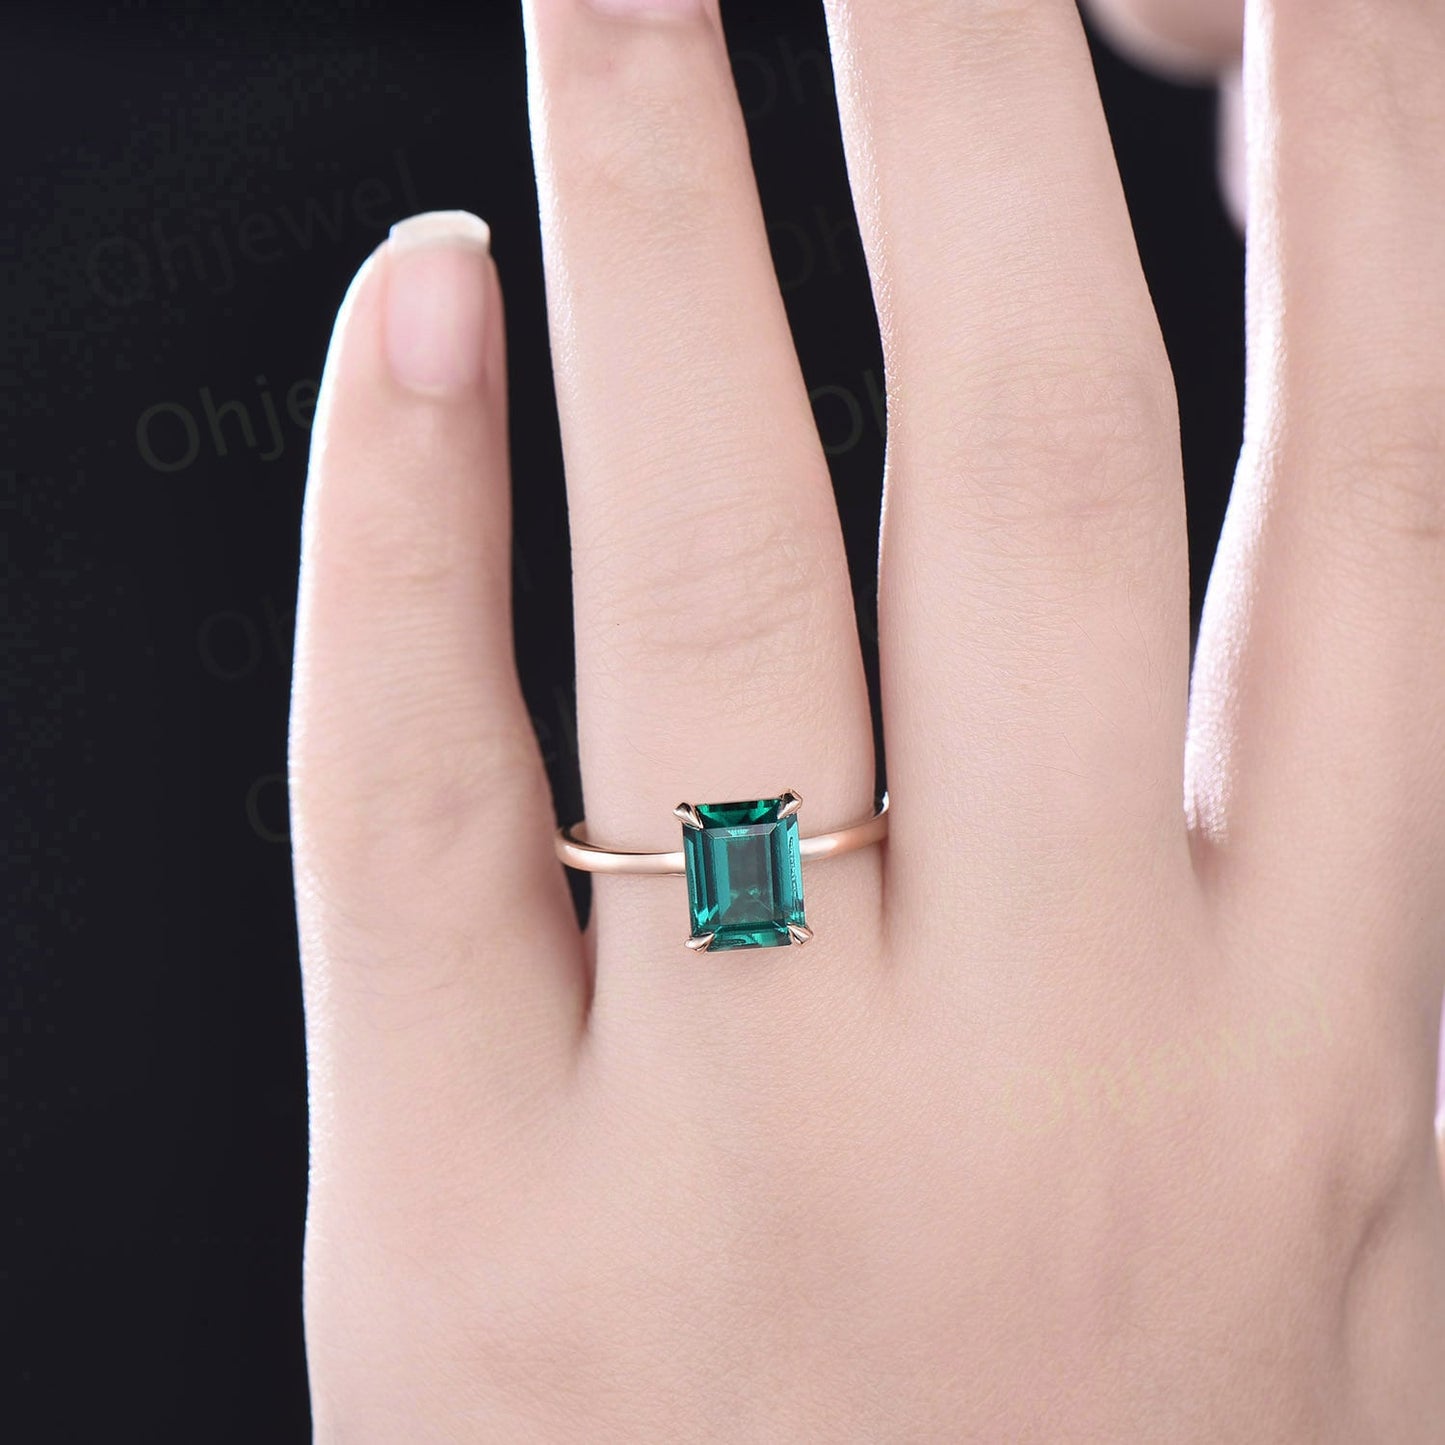 4ct emerald cut green emerald engagement ring rose gold vintage unique Solitaire engagement ring women sterling silver promise ring gift